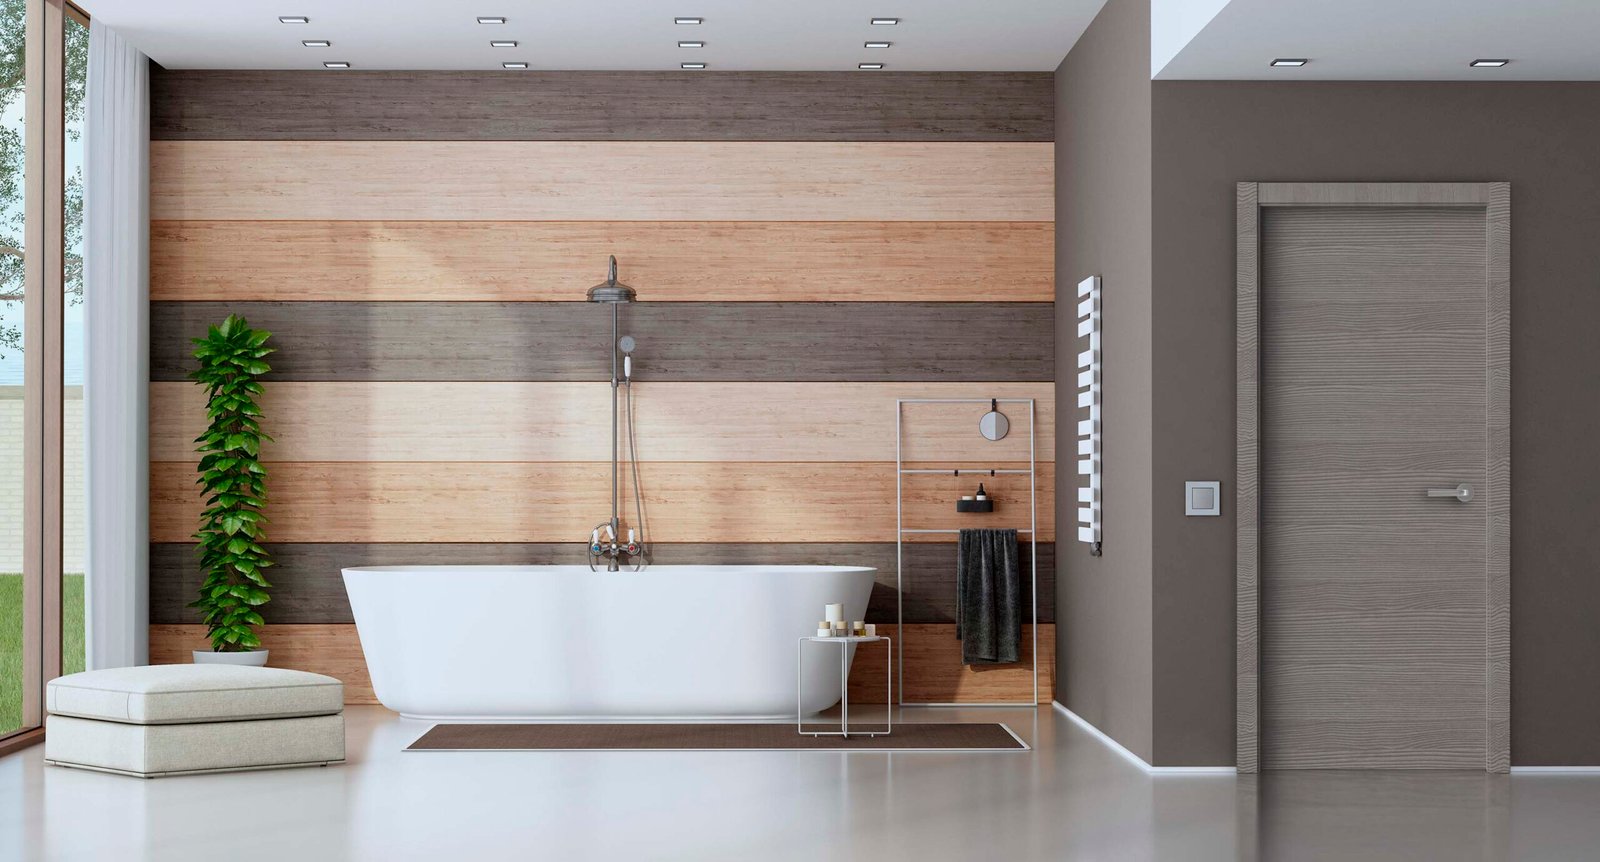 Contemporary bathroom with bathtub against wooden wall - 3d rendering